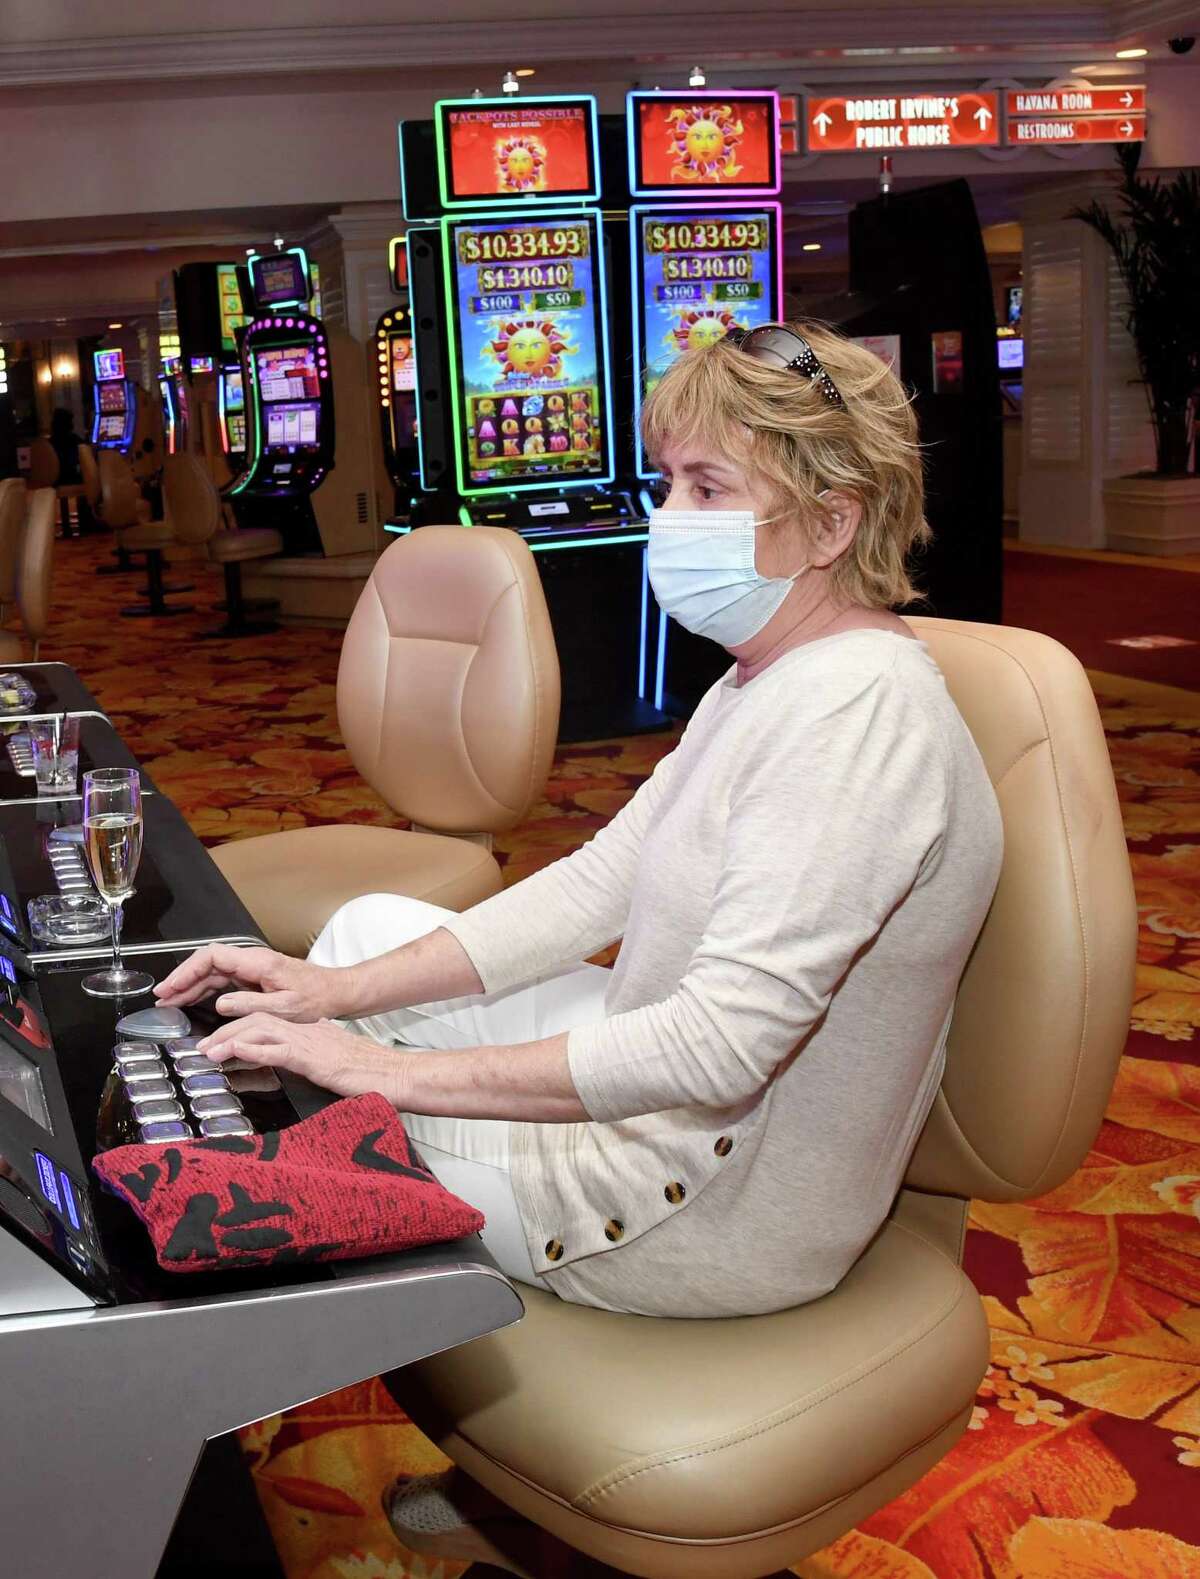 Casinos in Las Vegas are open. But shows remain dark and conventions have yet to return.